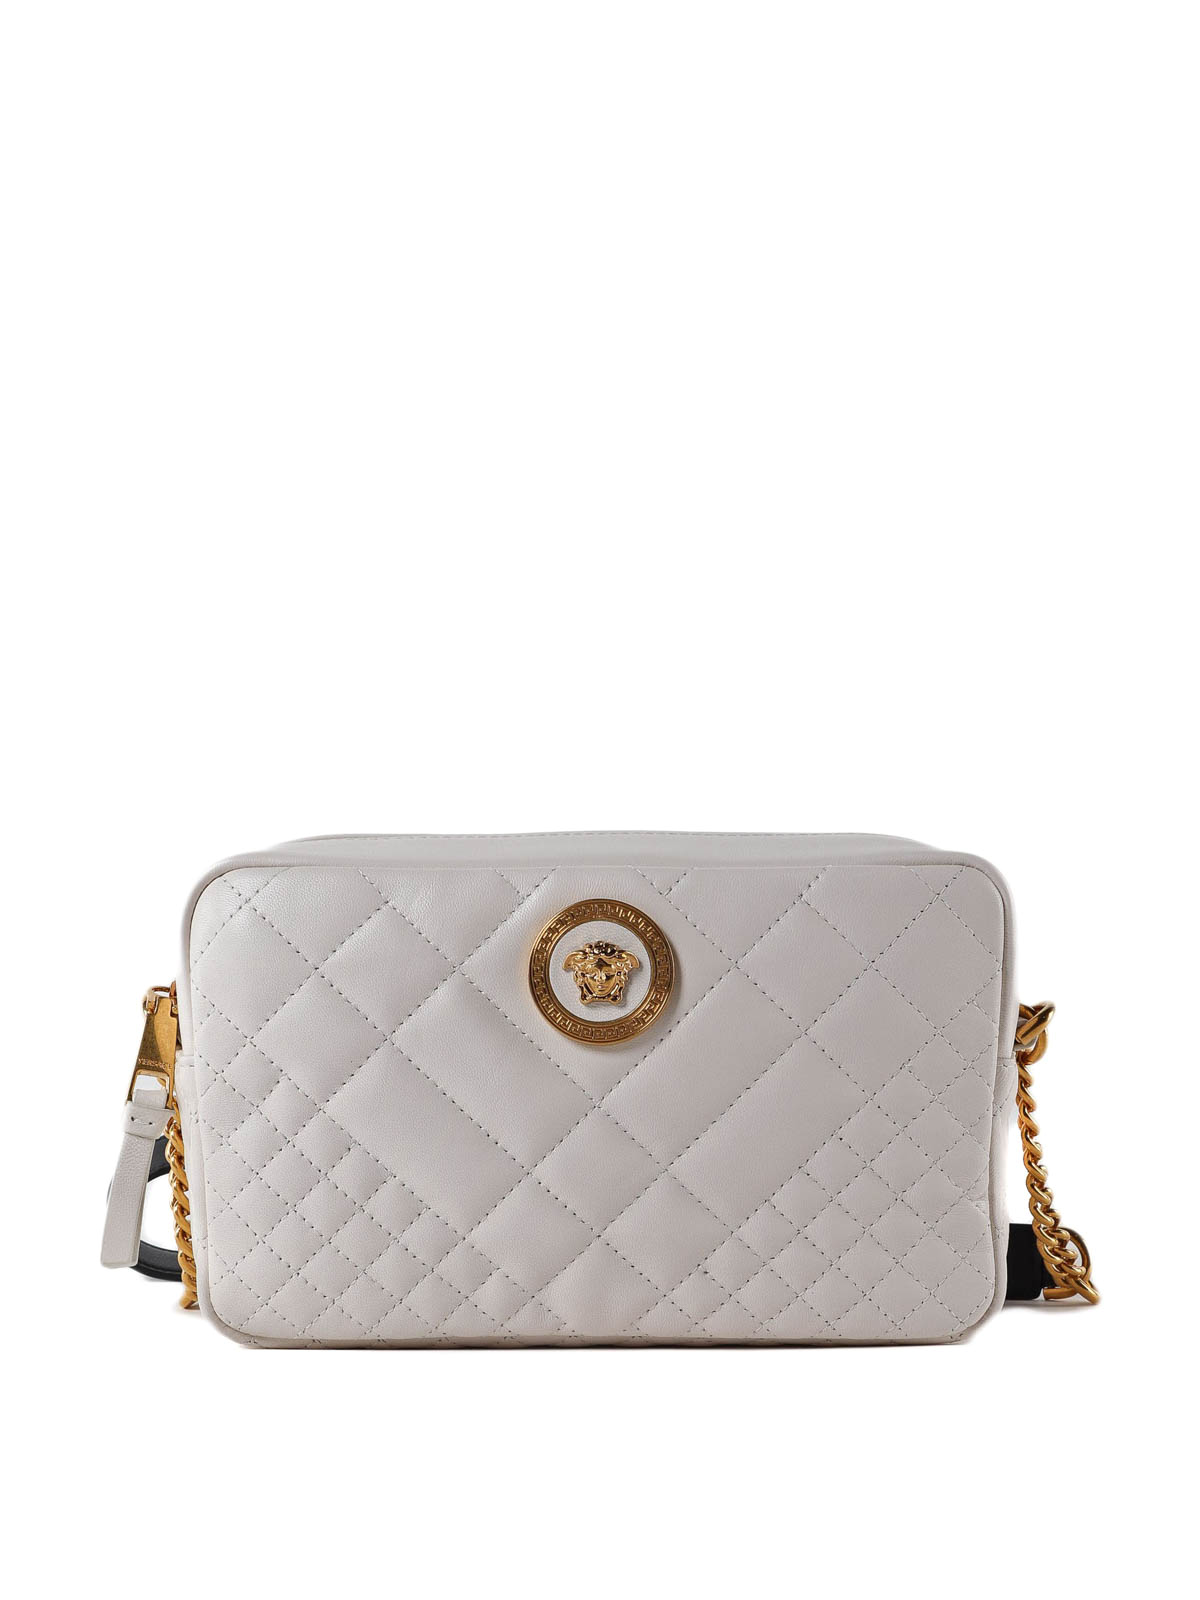 Versace Quilted Medusa Crossbody Bag in White